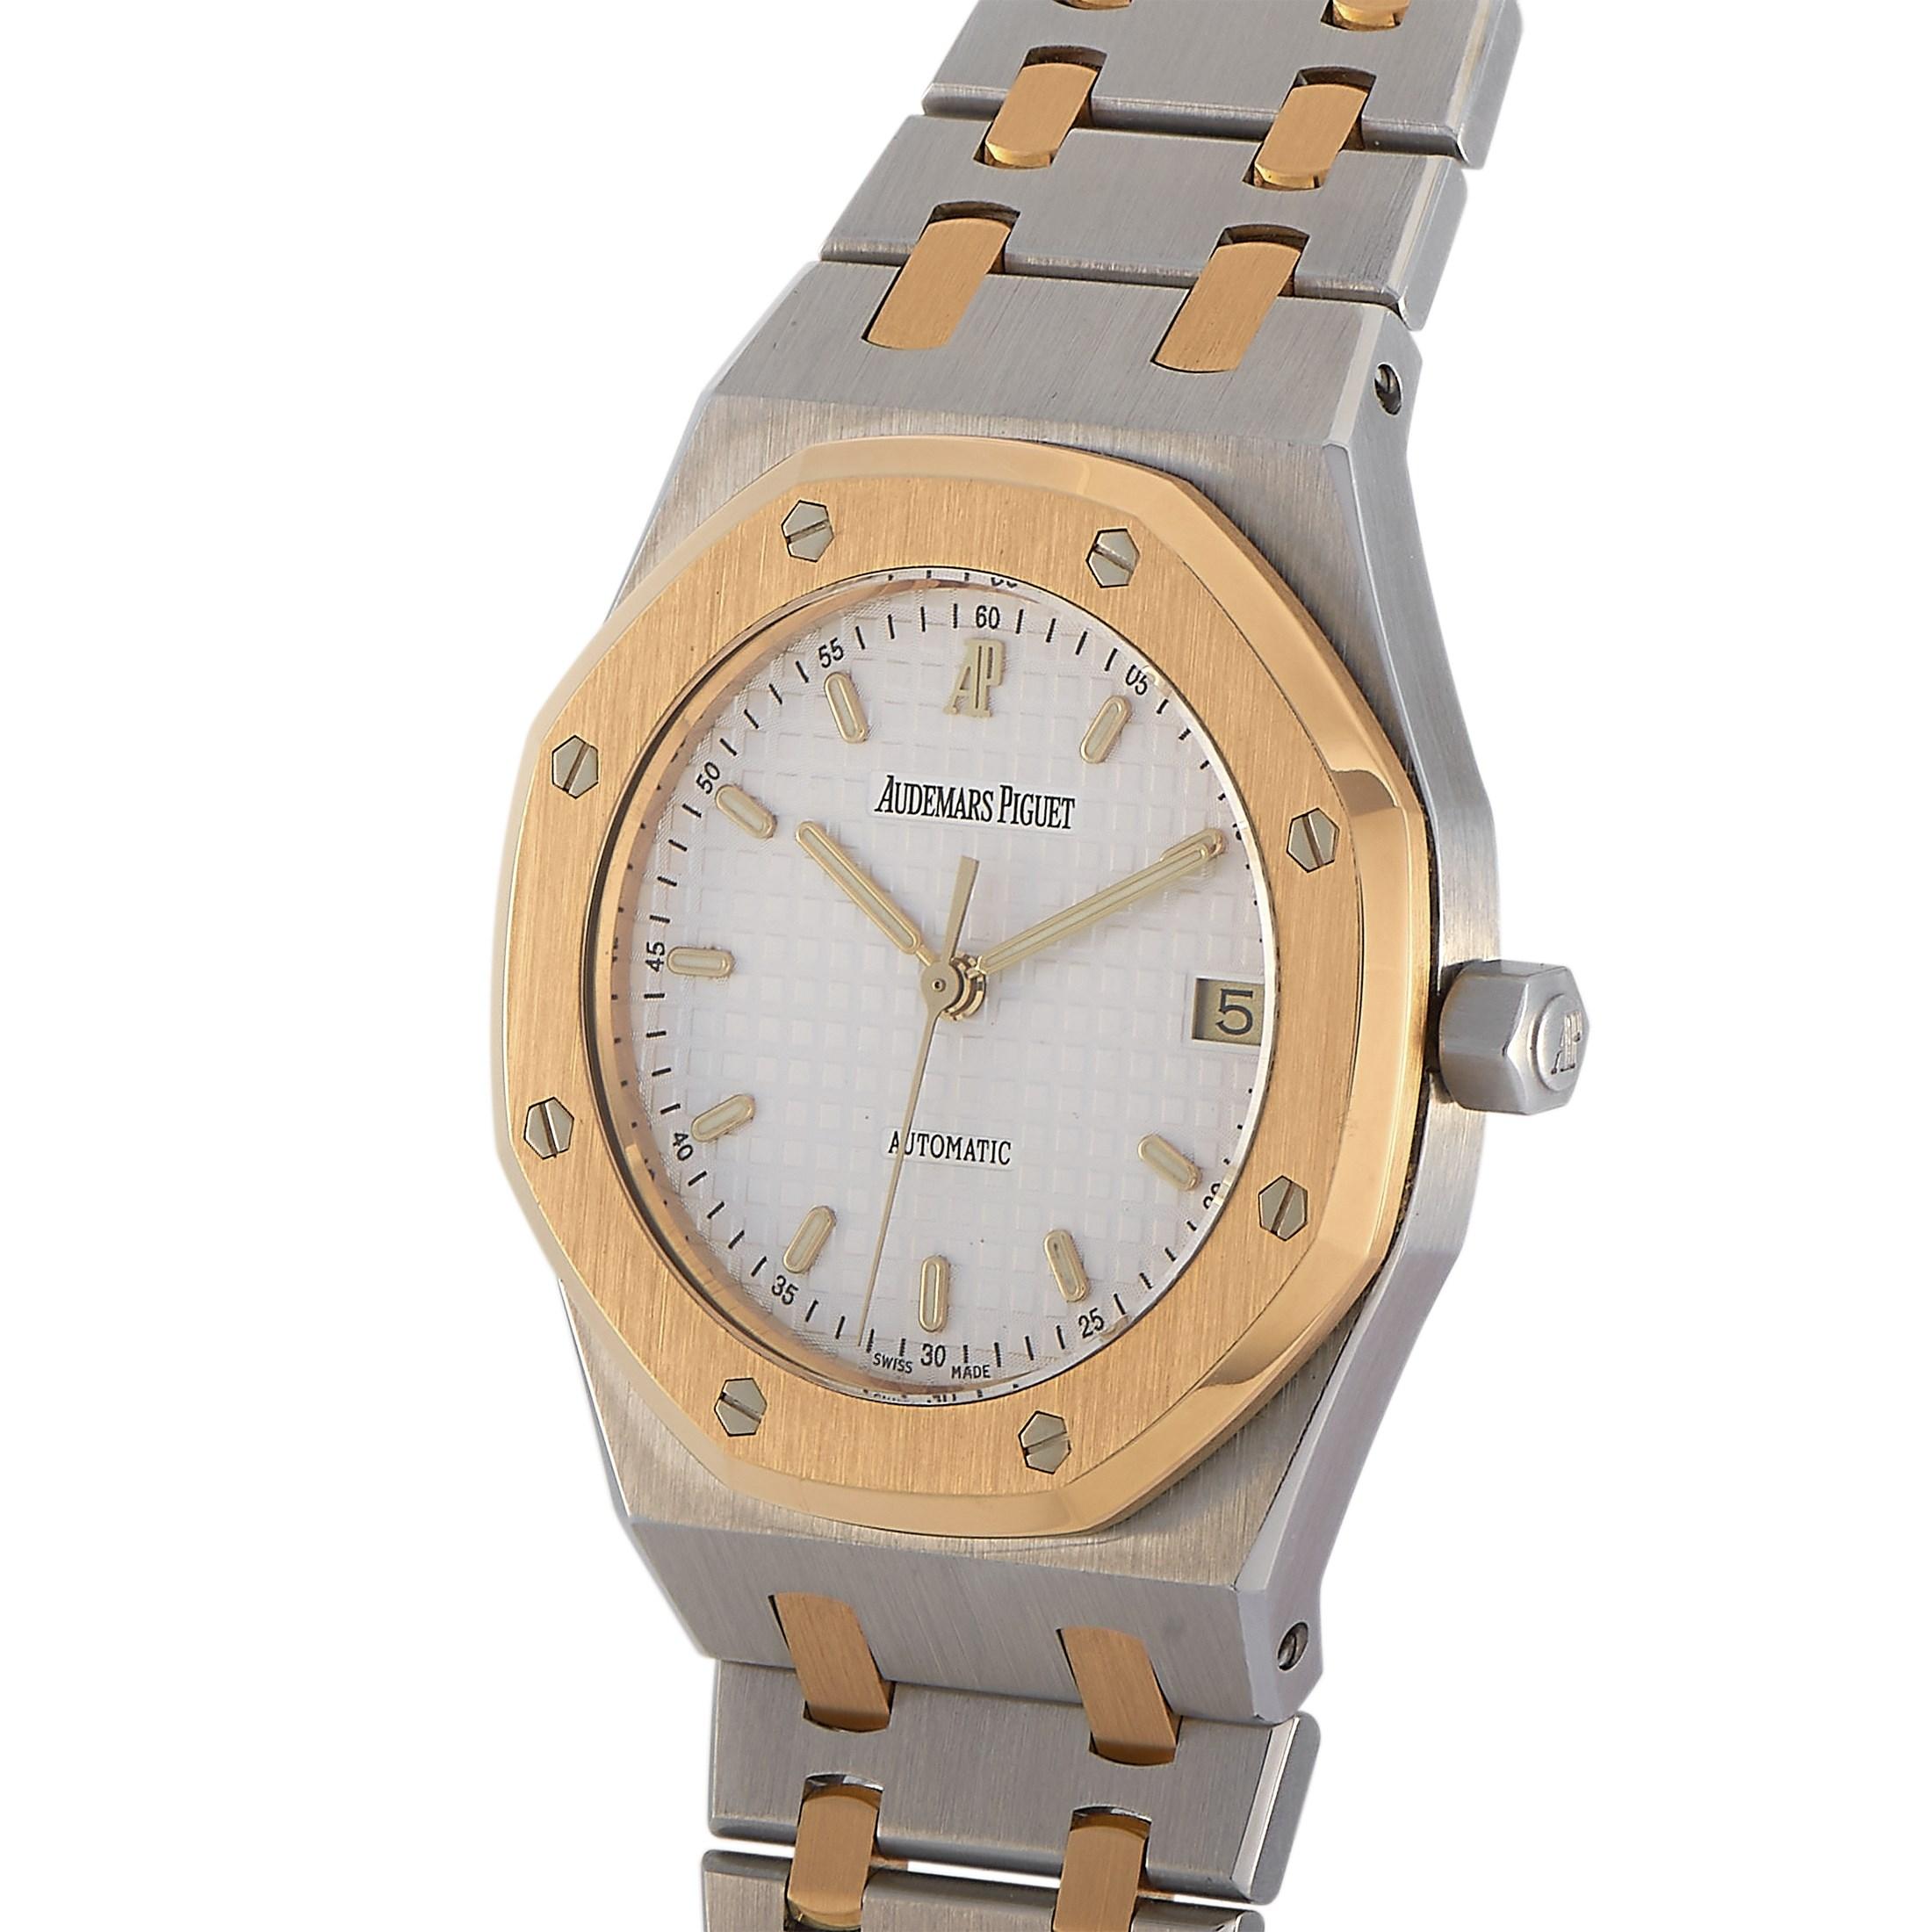 This Royal Oak Mid Size is a legend. It bears the classic Genta design. This watch has a 36mm two-toned case fashioned from stainless steel and topped with an 18K yellow gold octagonal bezel with hexagonal bolts. This impressive watch with a